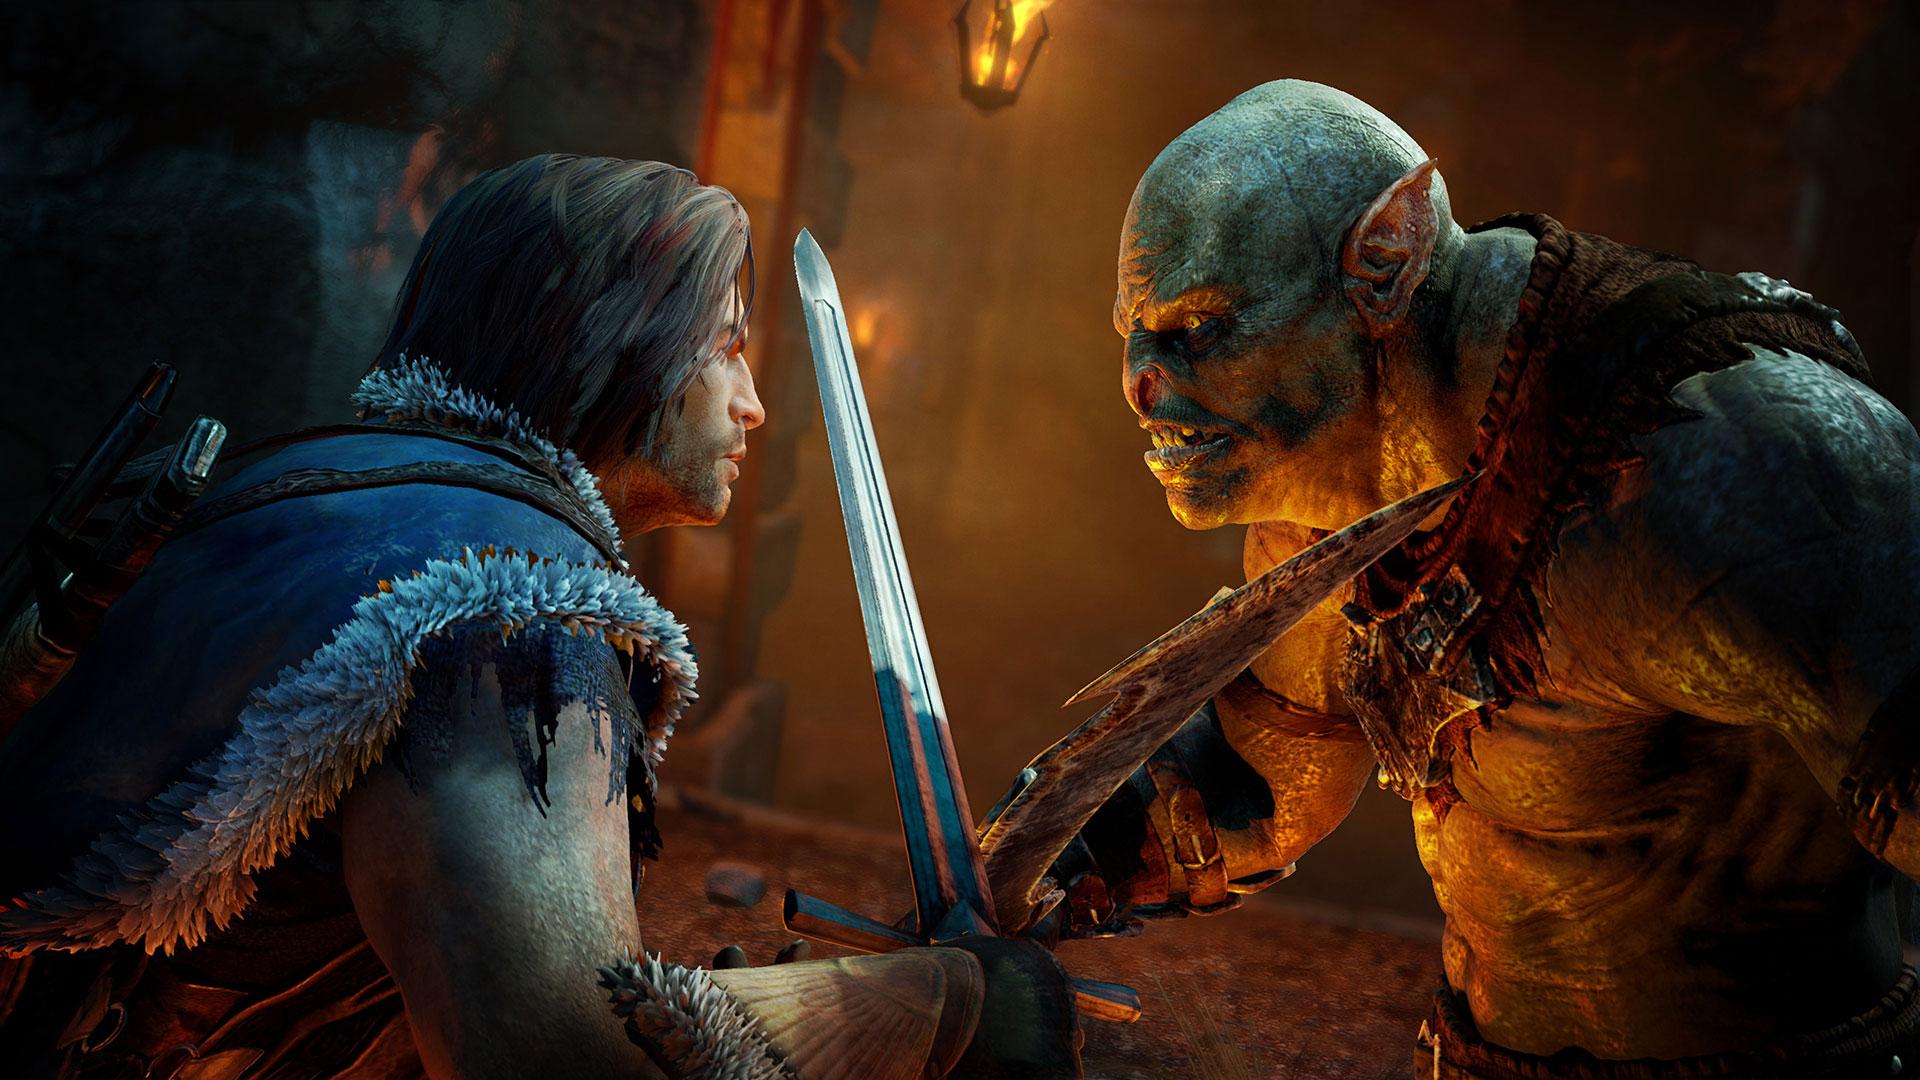 Middle-earth: Shadow of Mordor Guide, Tips and Tricks